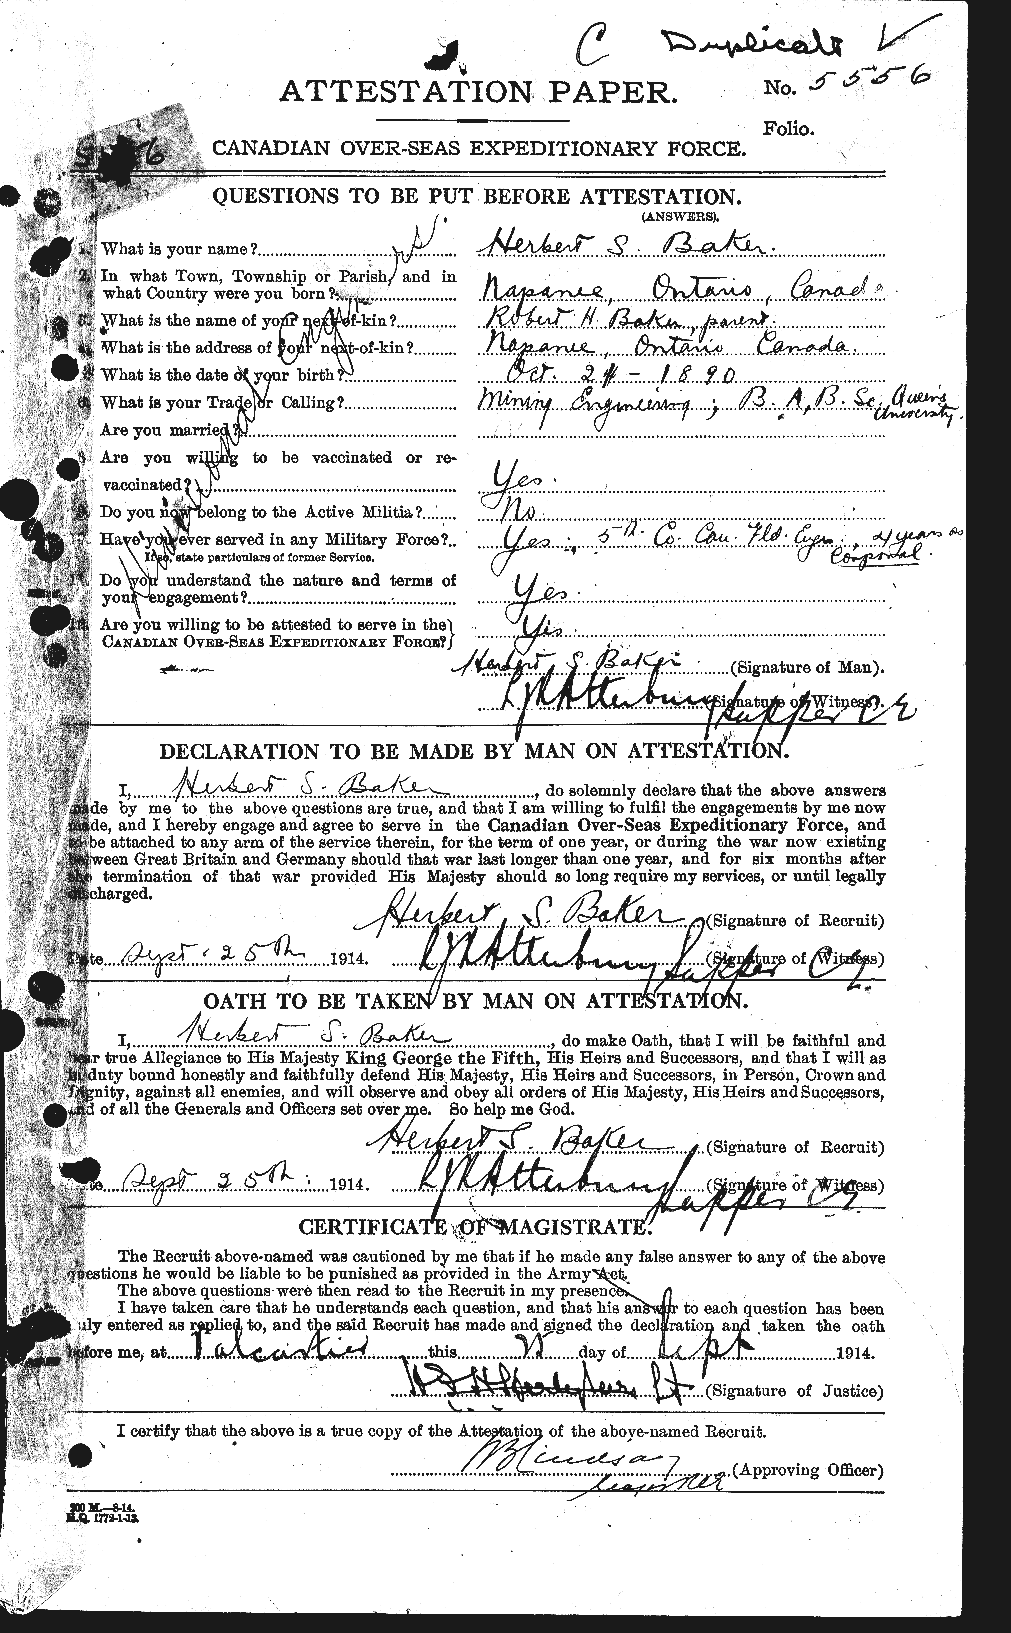 Personnel Records of the First World War - CEF 216109a